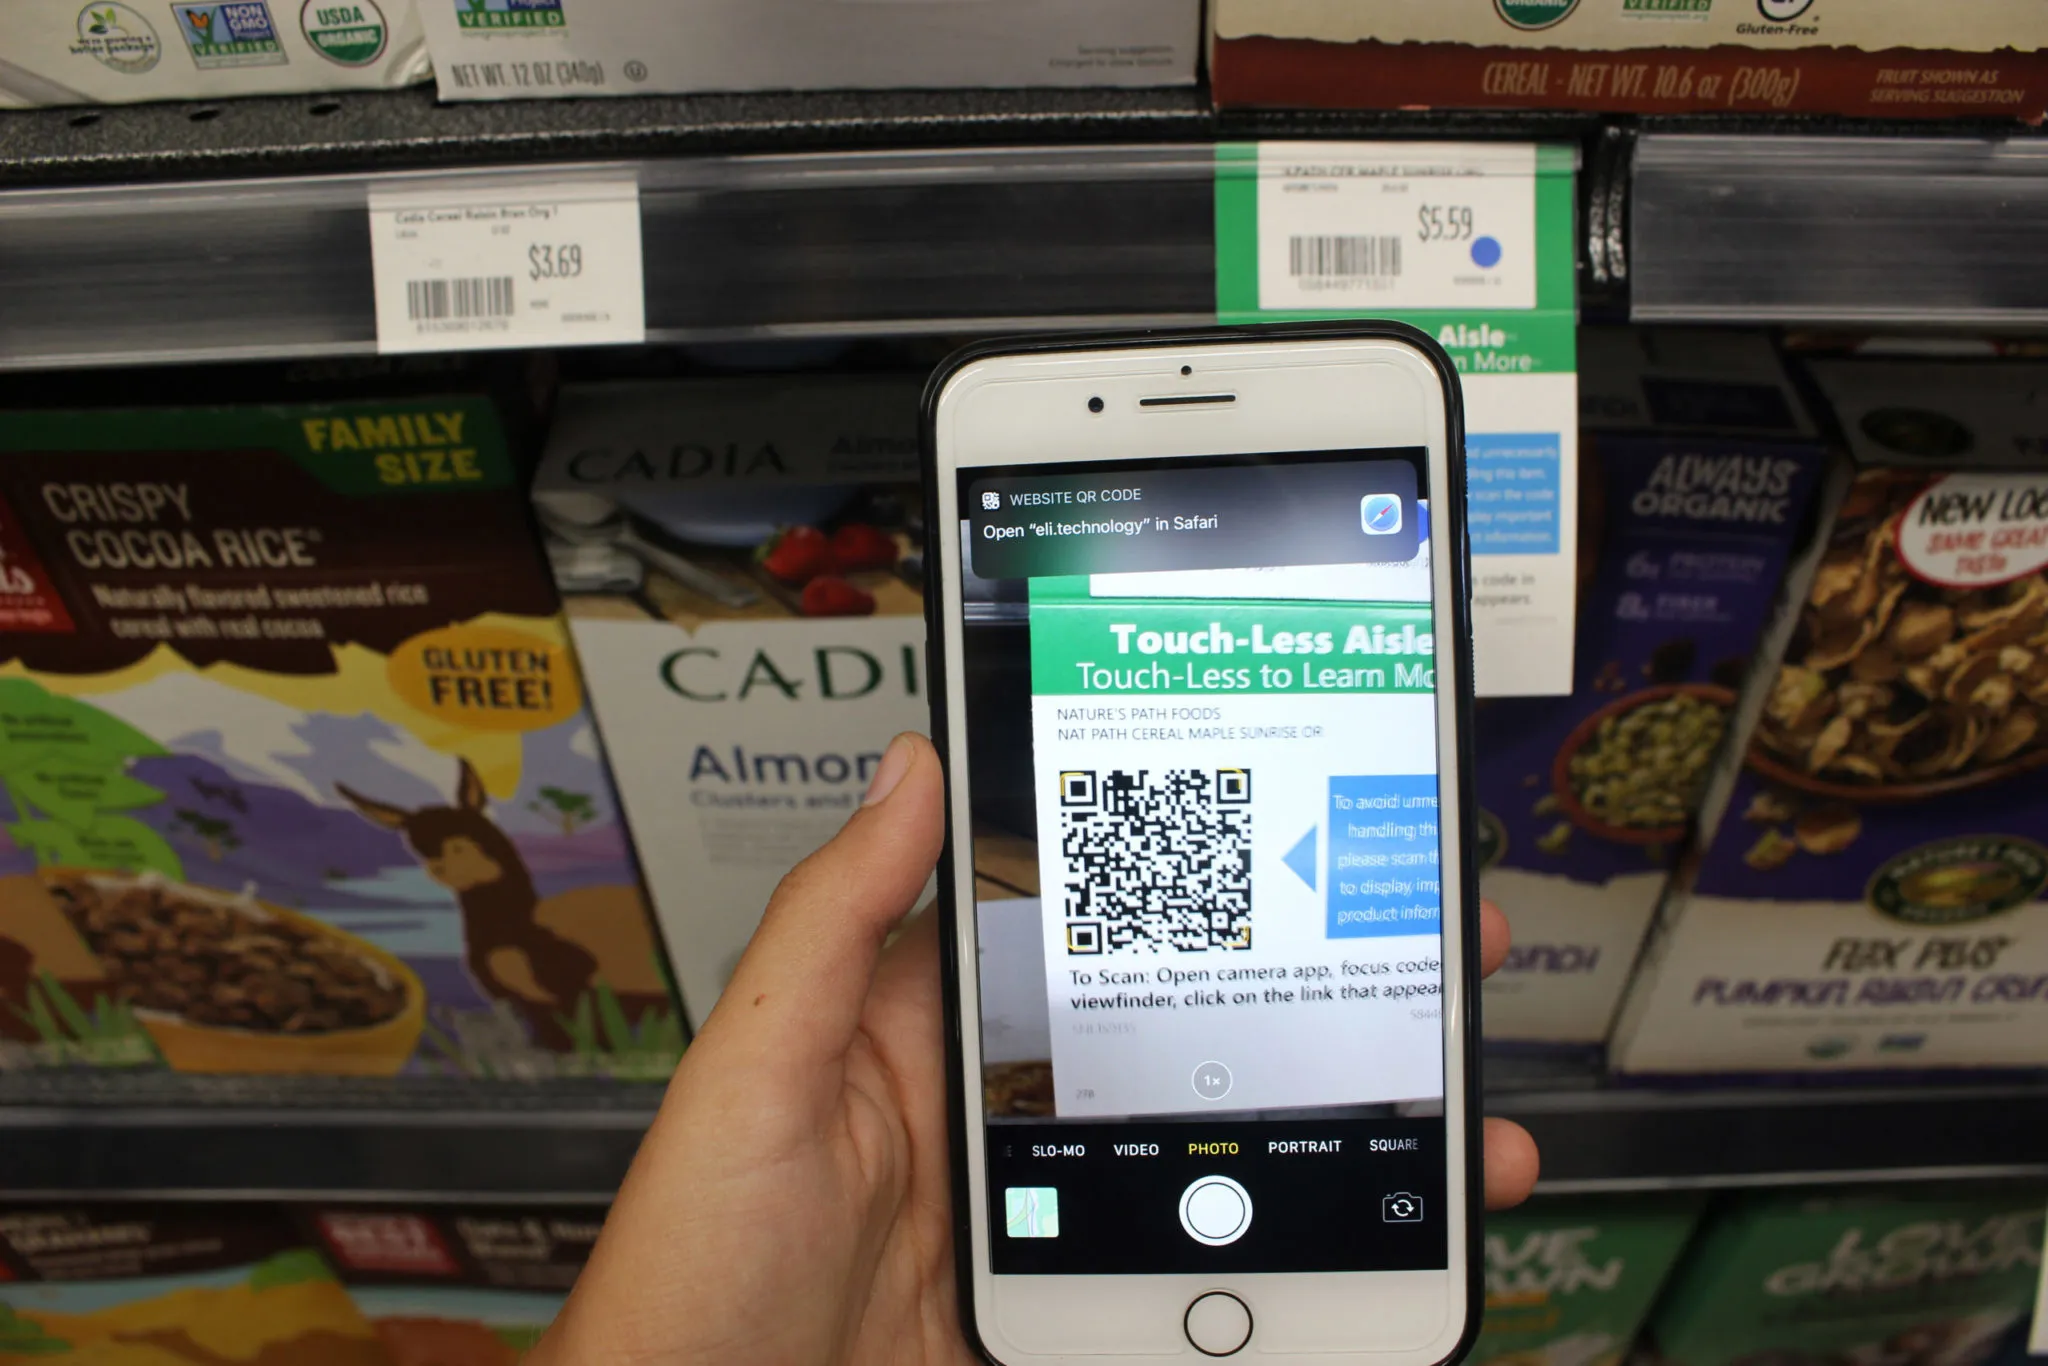 Tampa-based Cornerstone Consulting offers smart shelf tags, QR codes with digital content for an enhanced shopping experience